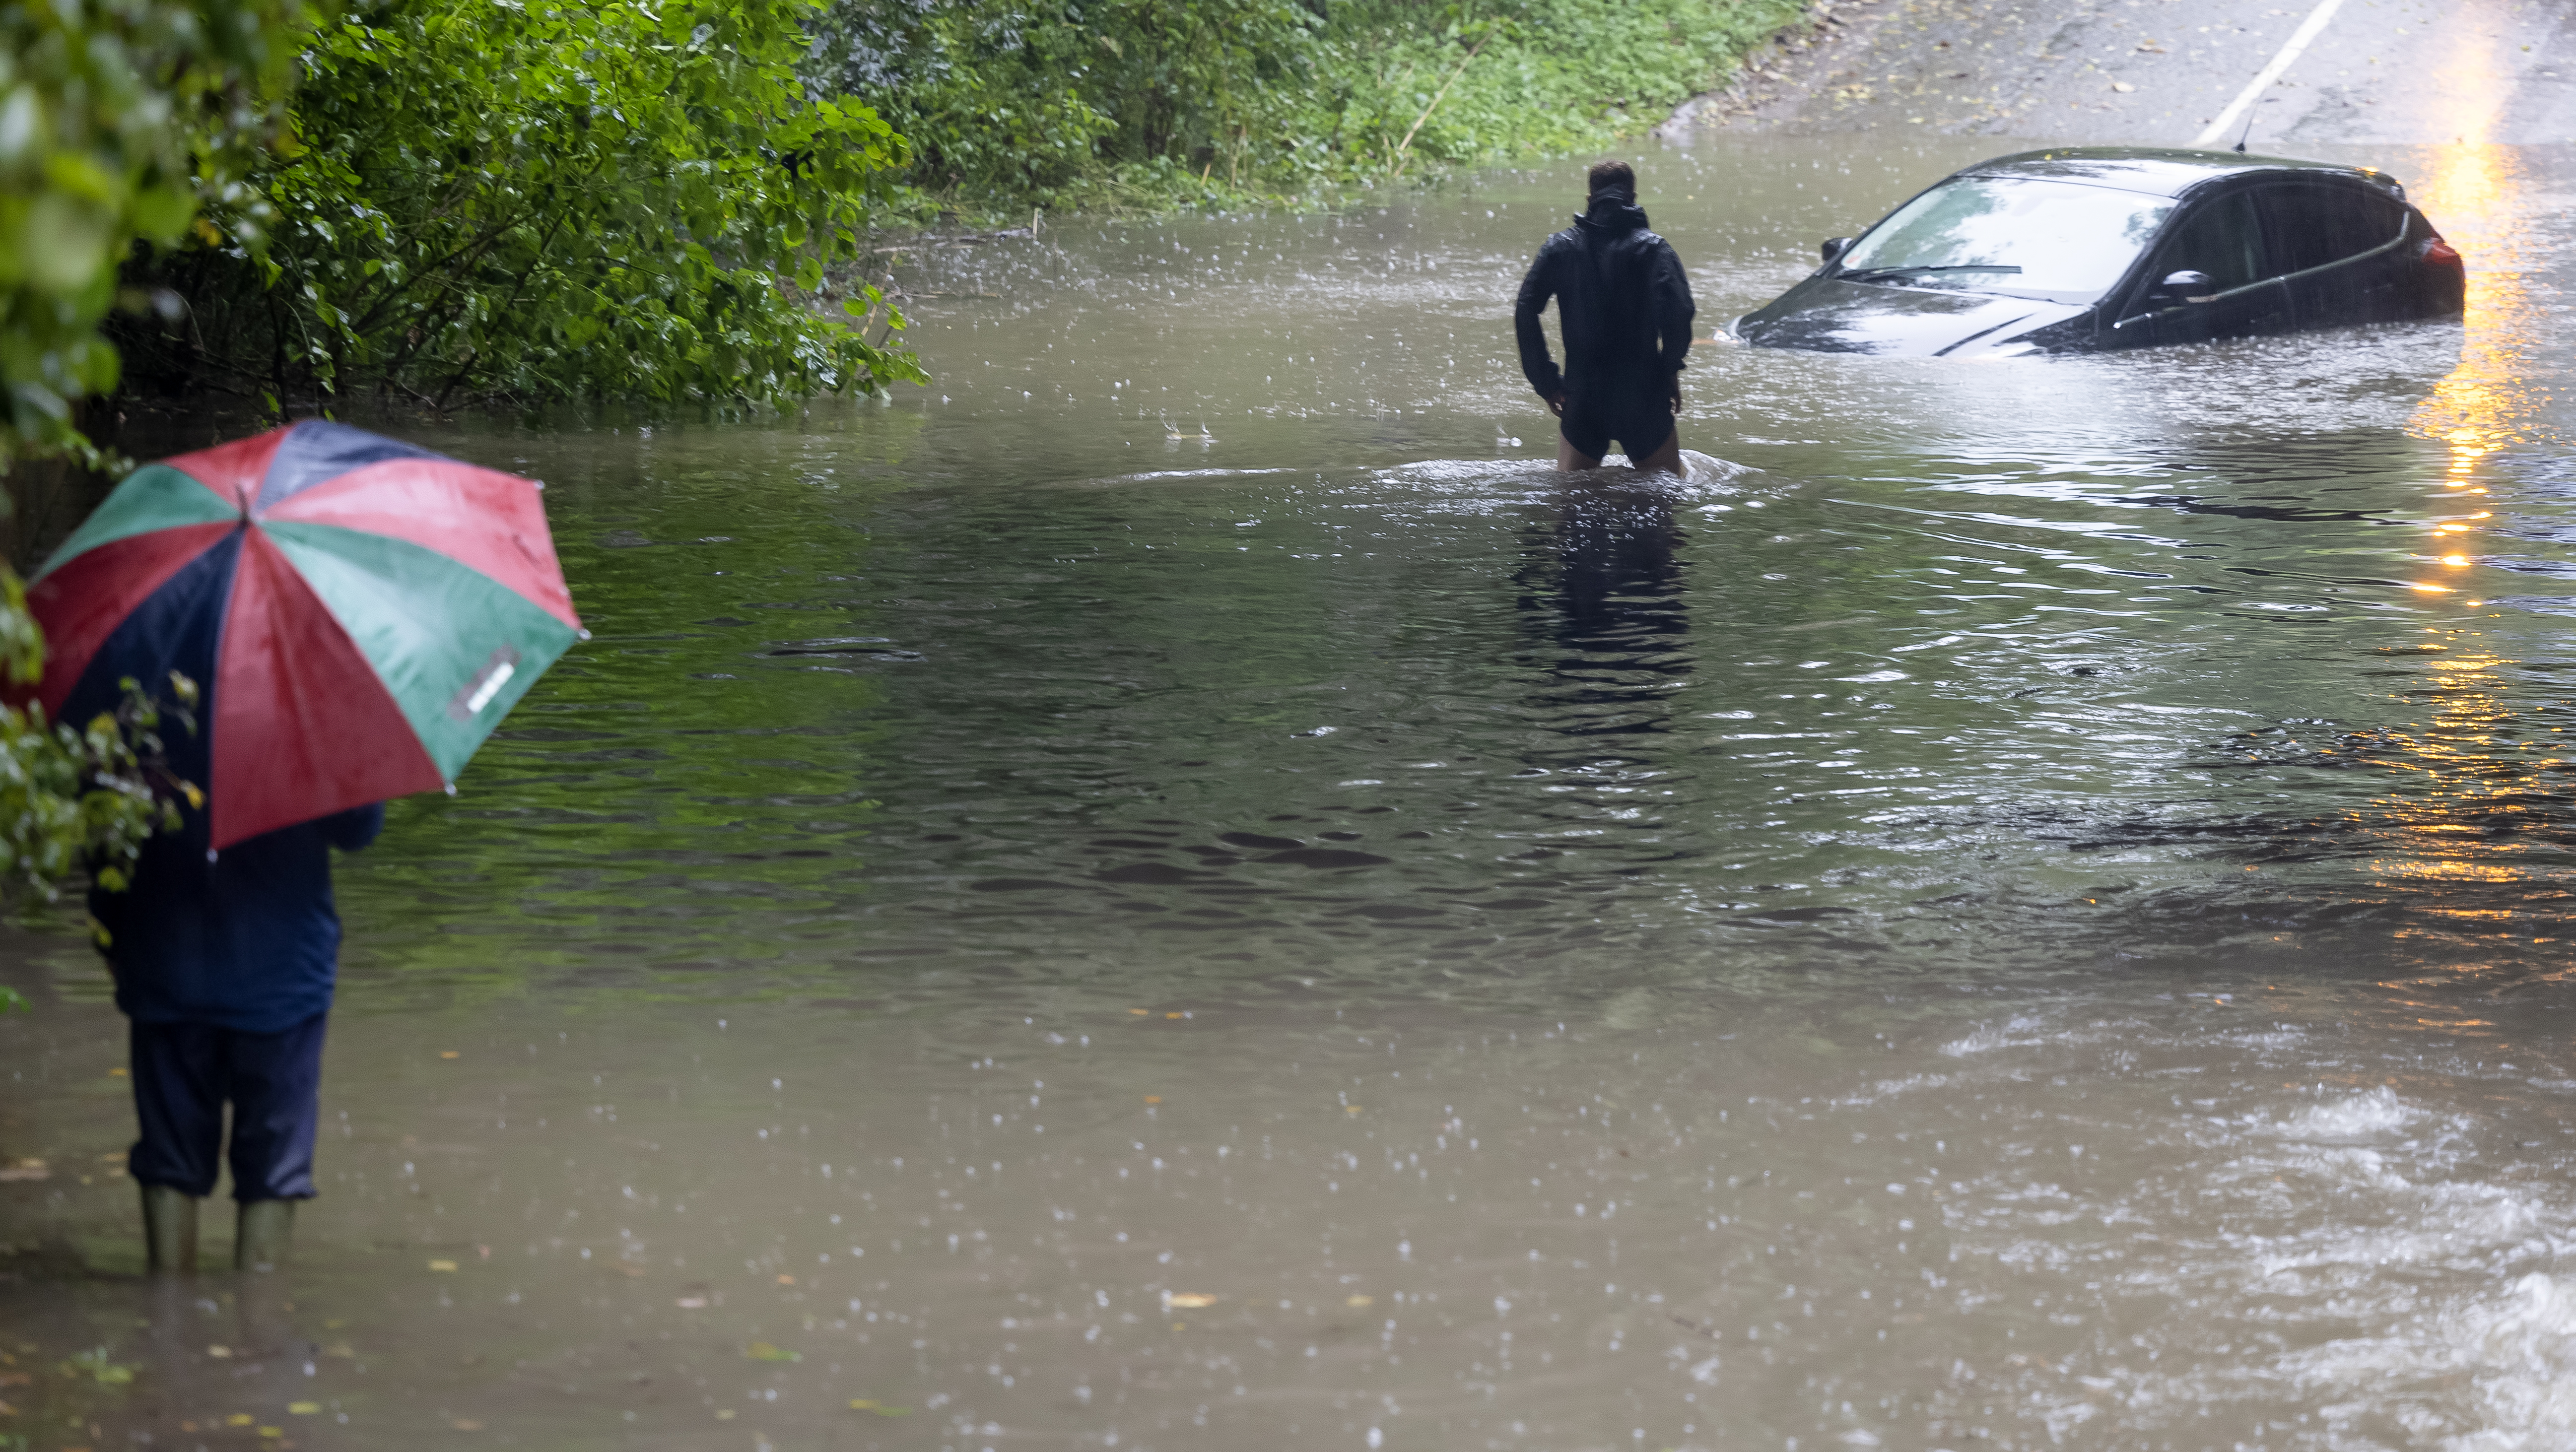 A brave bystander wades in to flood-water in Ashbourne, Derbyshire, to check if anybody is still inside a car stranded in deep water